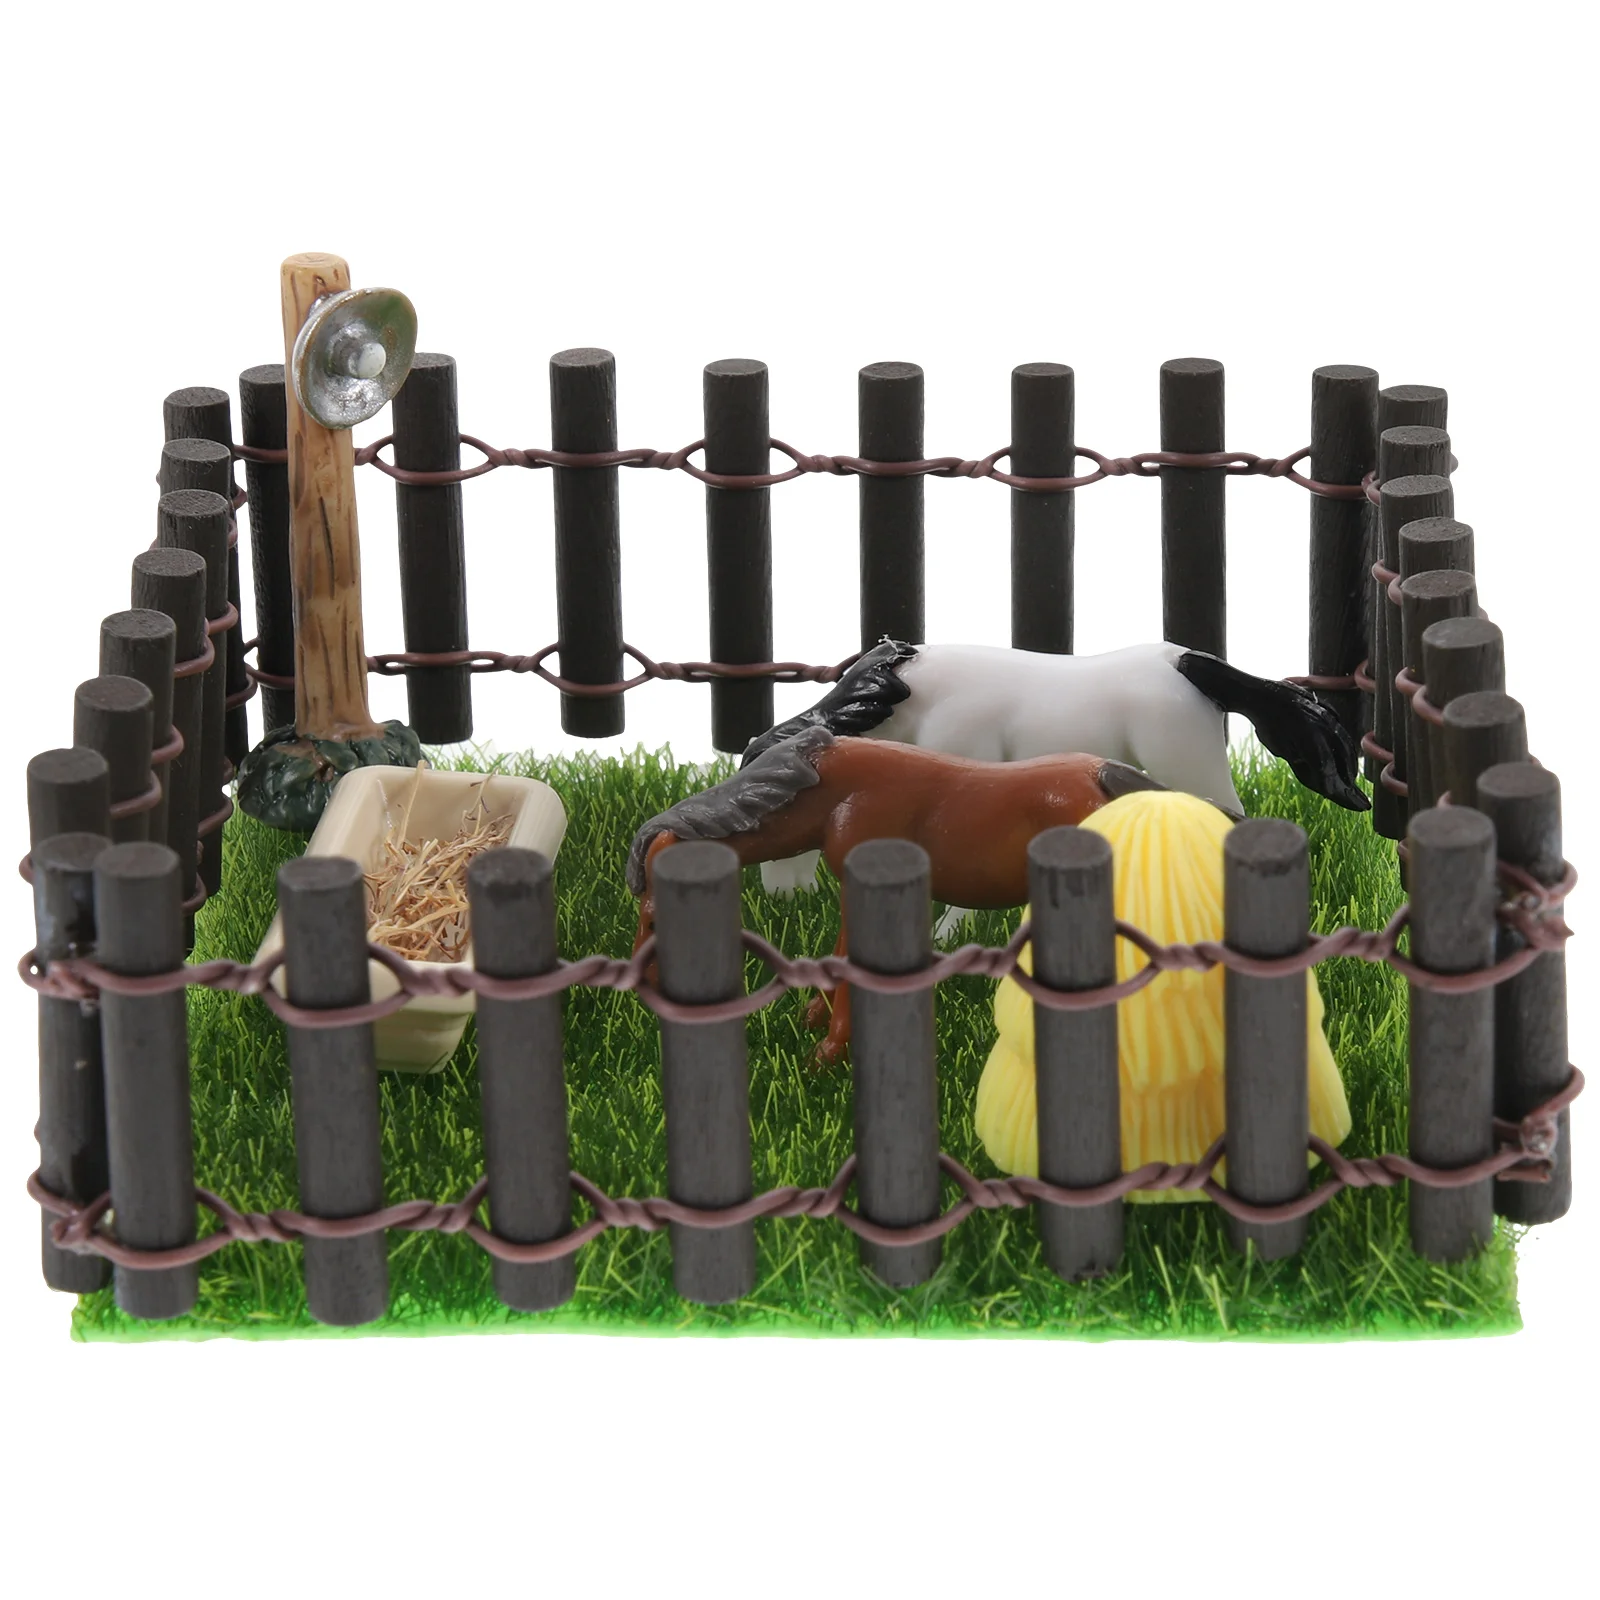 

Miniature Horse Barn Stable Toy DIY Kit Display Model Fence Stud-farm Ranch Decorative Fencing